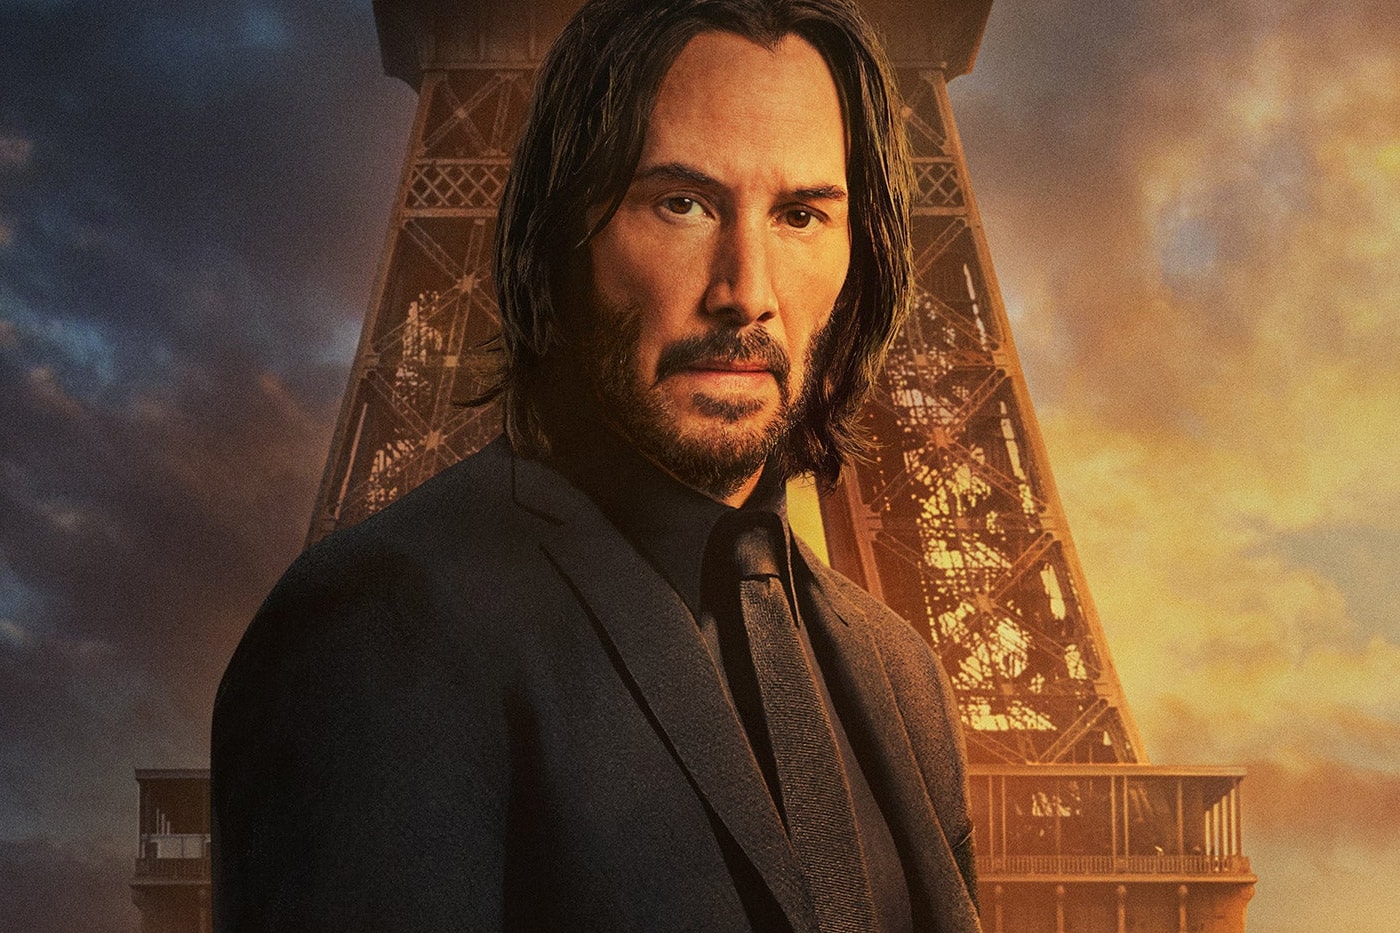 John Wick: Chapter 4, Official Franchise Movie Site